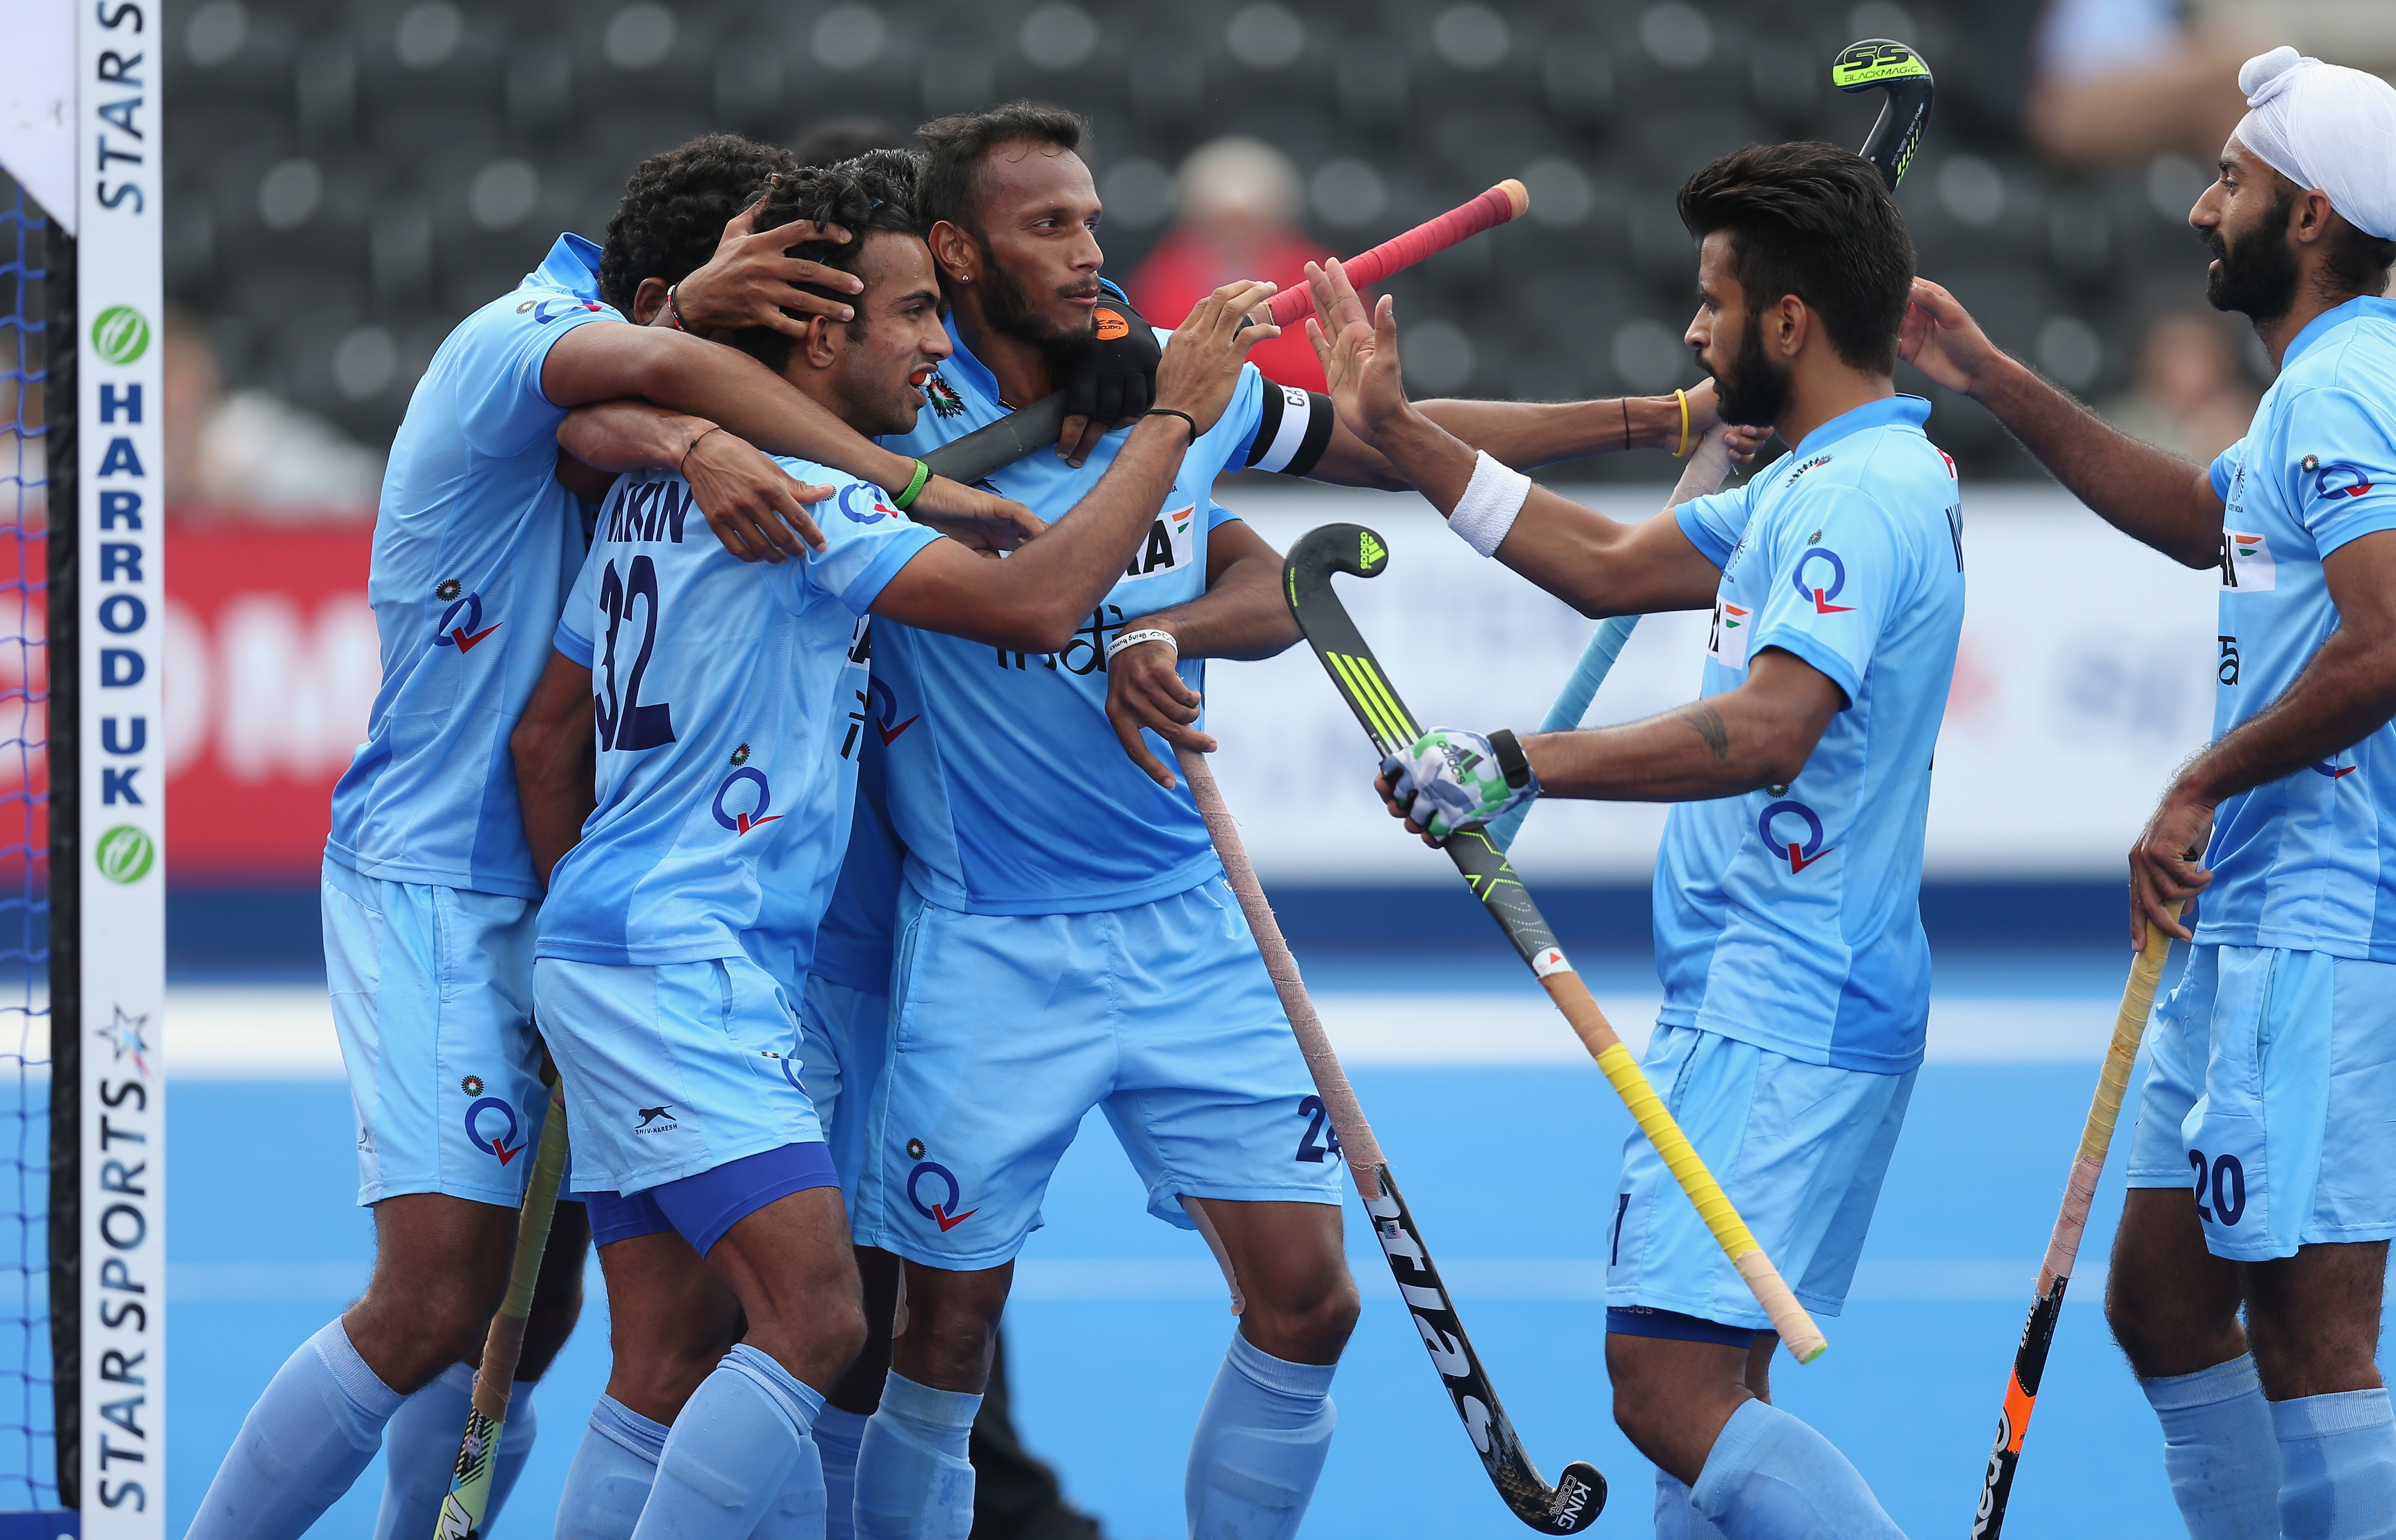 Hockey | India moves up the ladder to 5th in latest FIH rankings